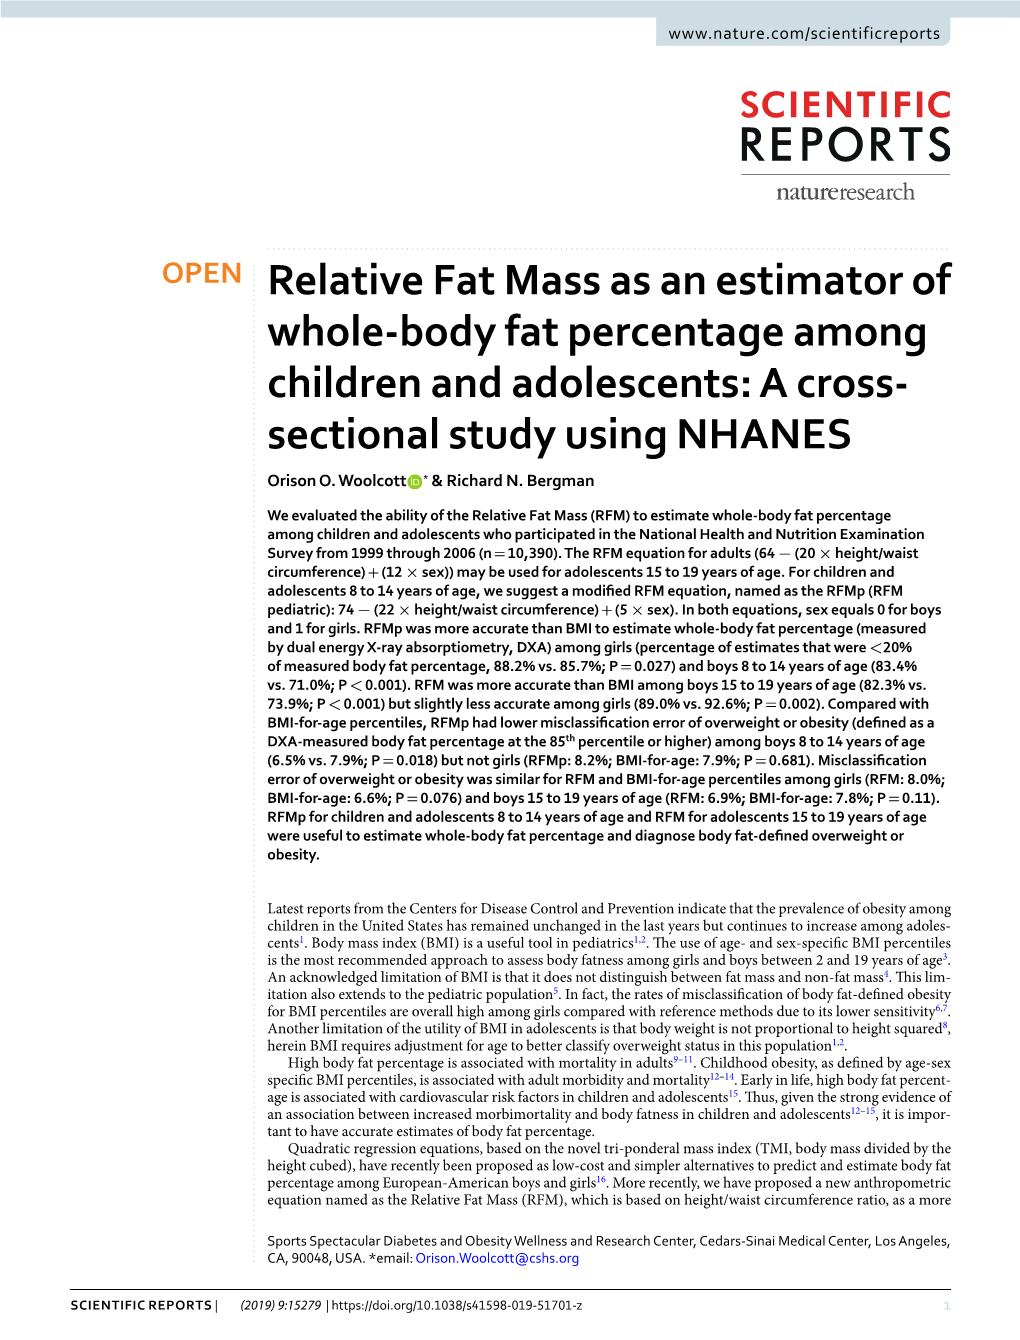 Relative Fat Mass As an Estimator of Whole-Body Fat Percentage Among Children and Adolescents: a Cross- Sectional Study Using NHANES Orison O